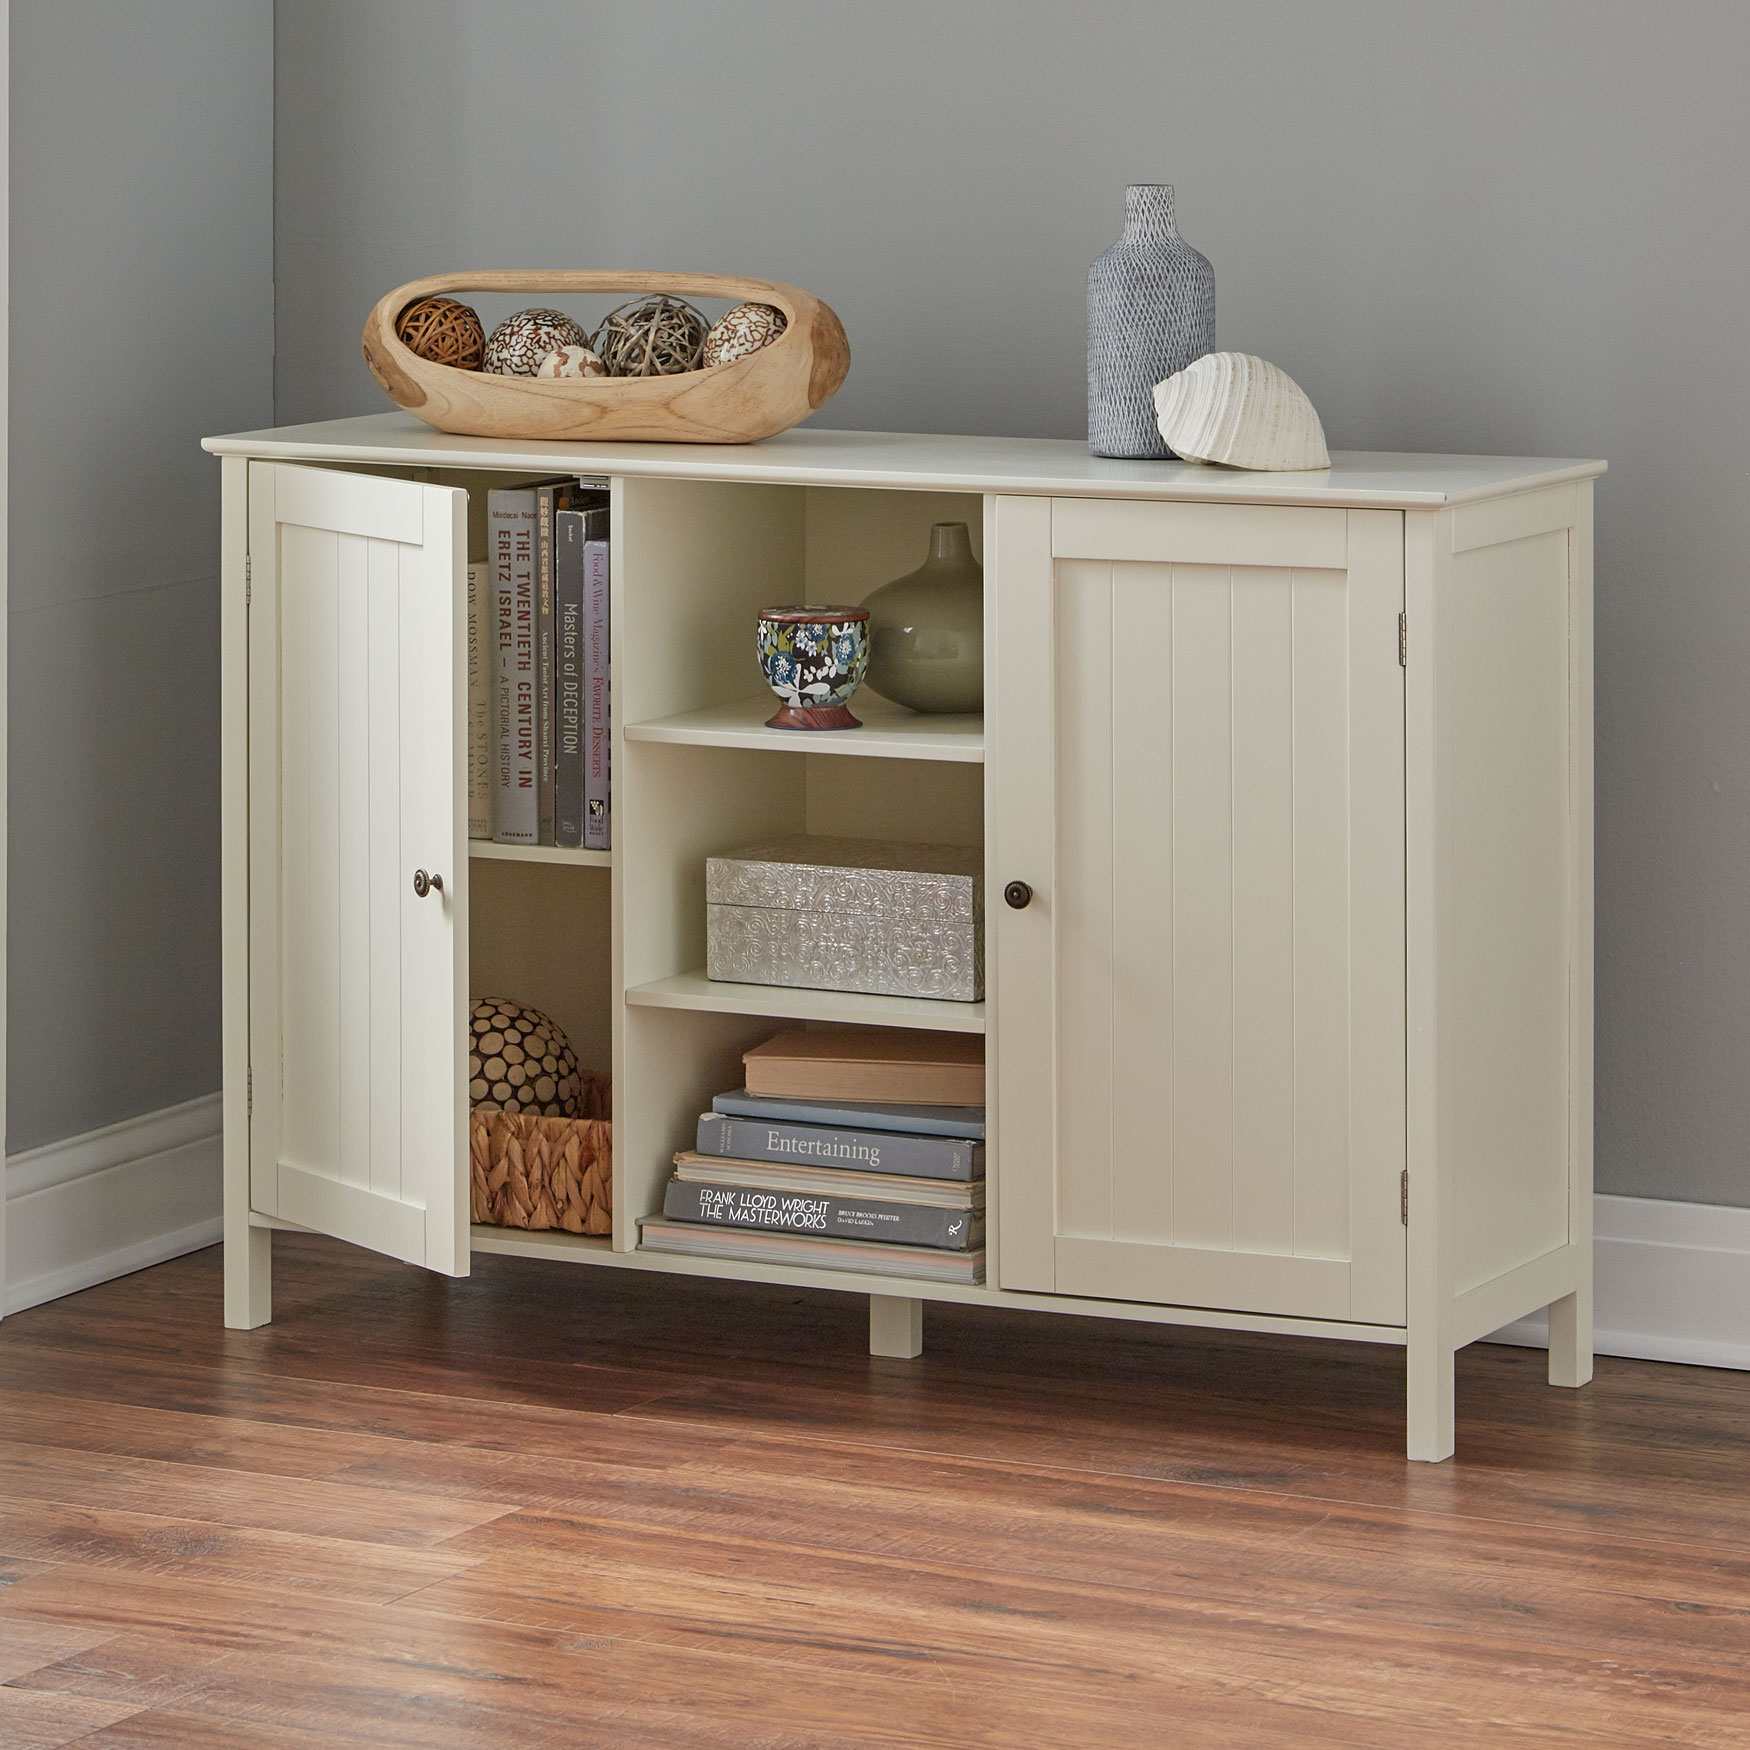 Adelaide 2 Door Cabinet With Shelves Wardrobes And Drawers Brylane Home